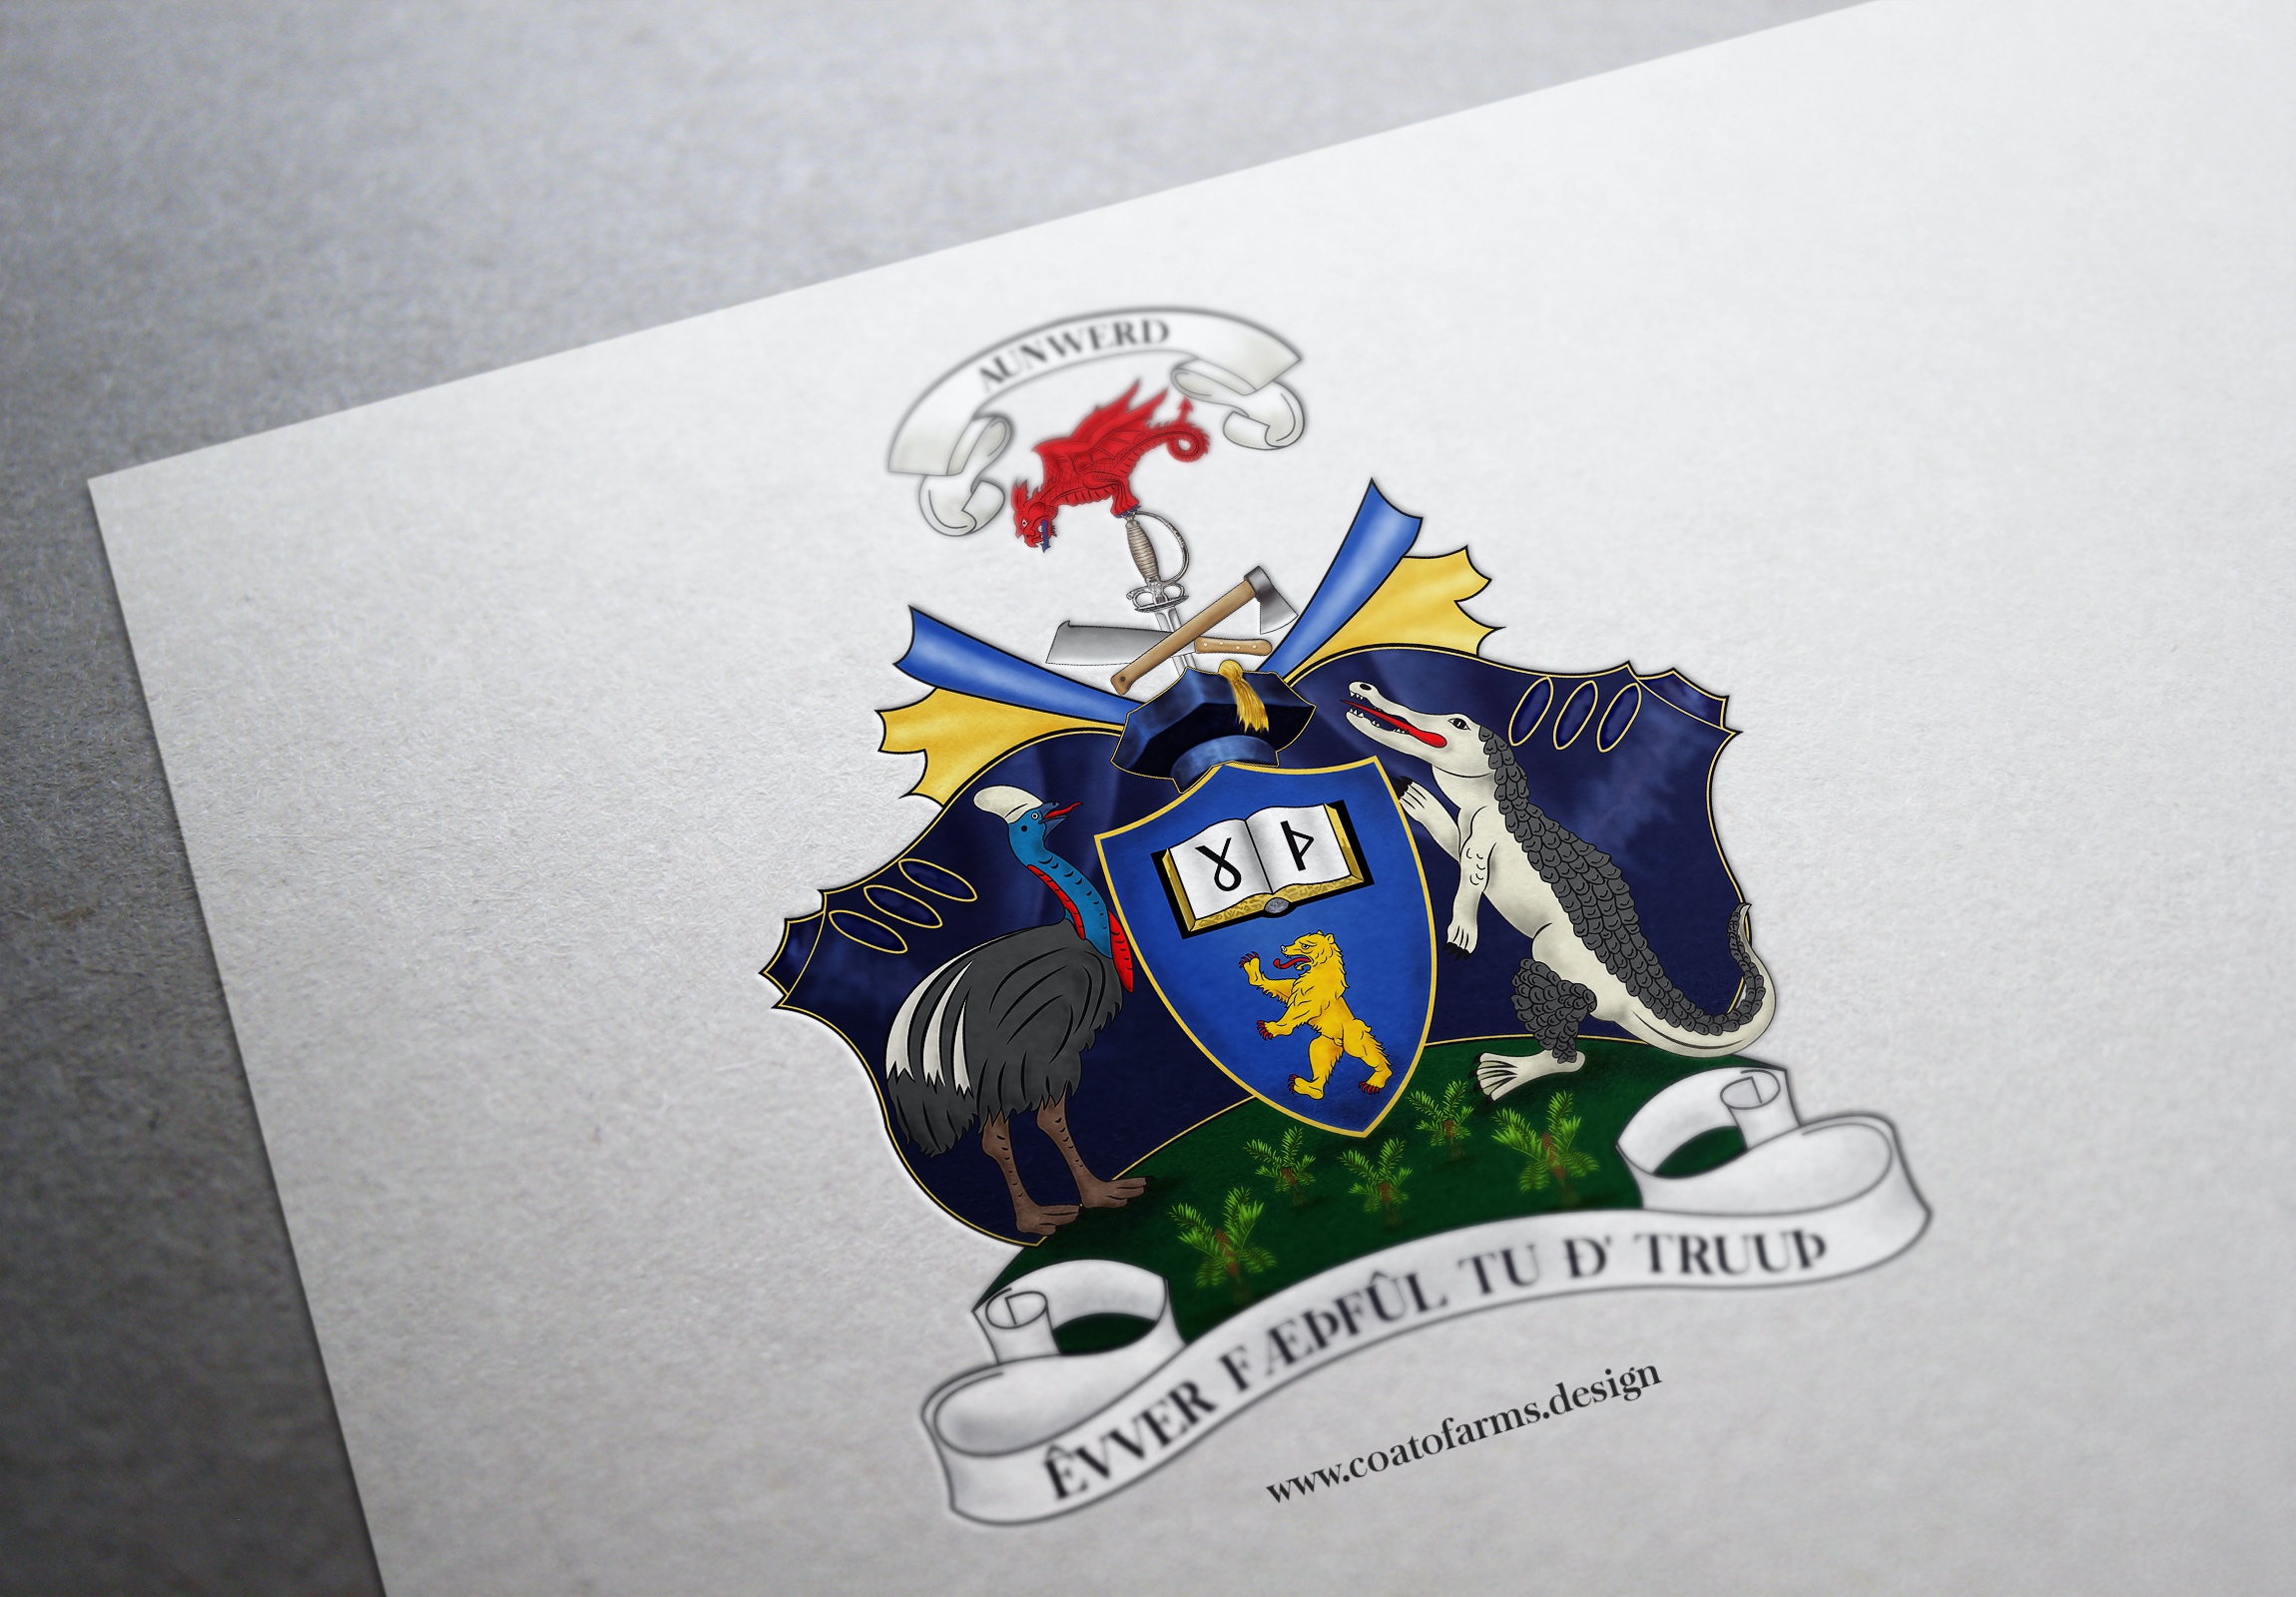 Coat of arms I designed for a PhD and a professional linguist from Australia big